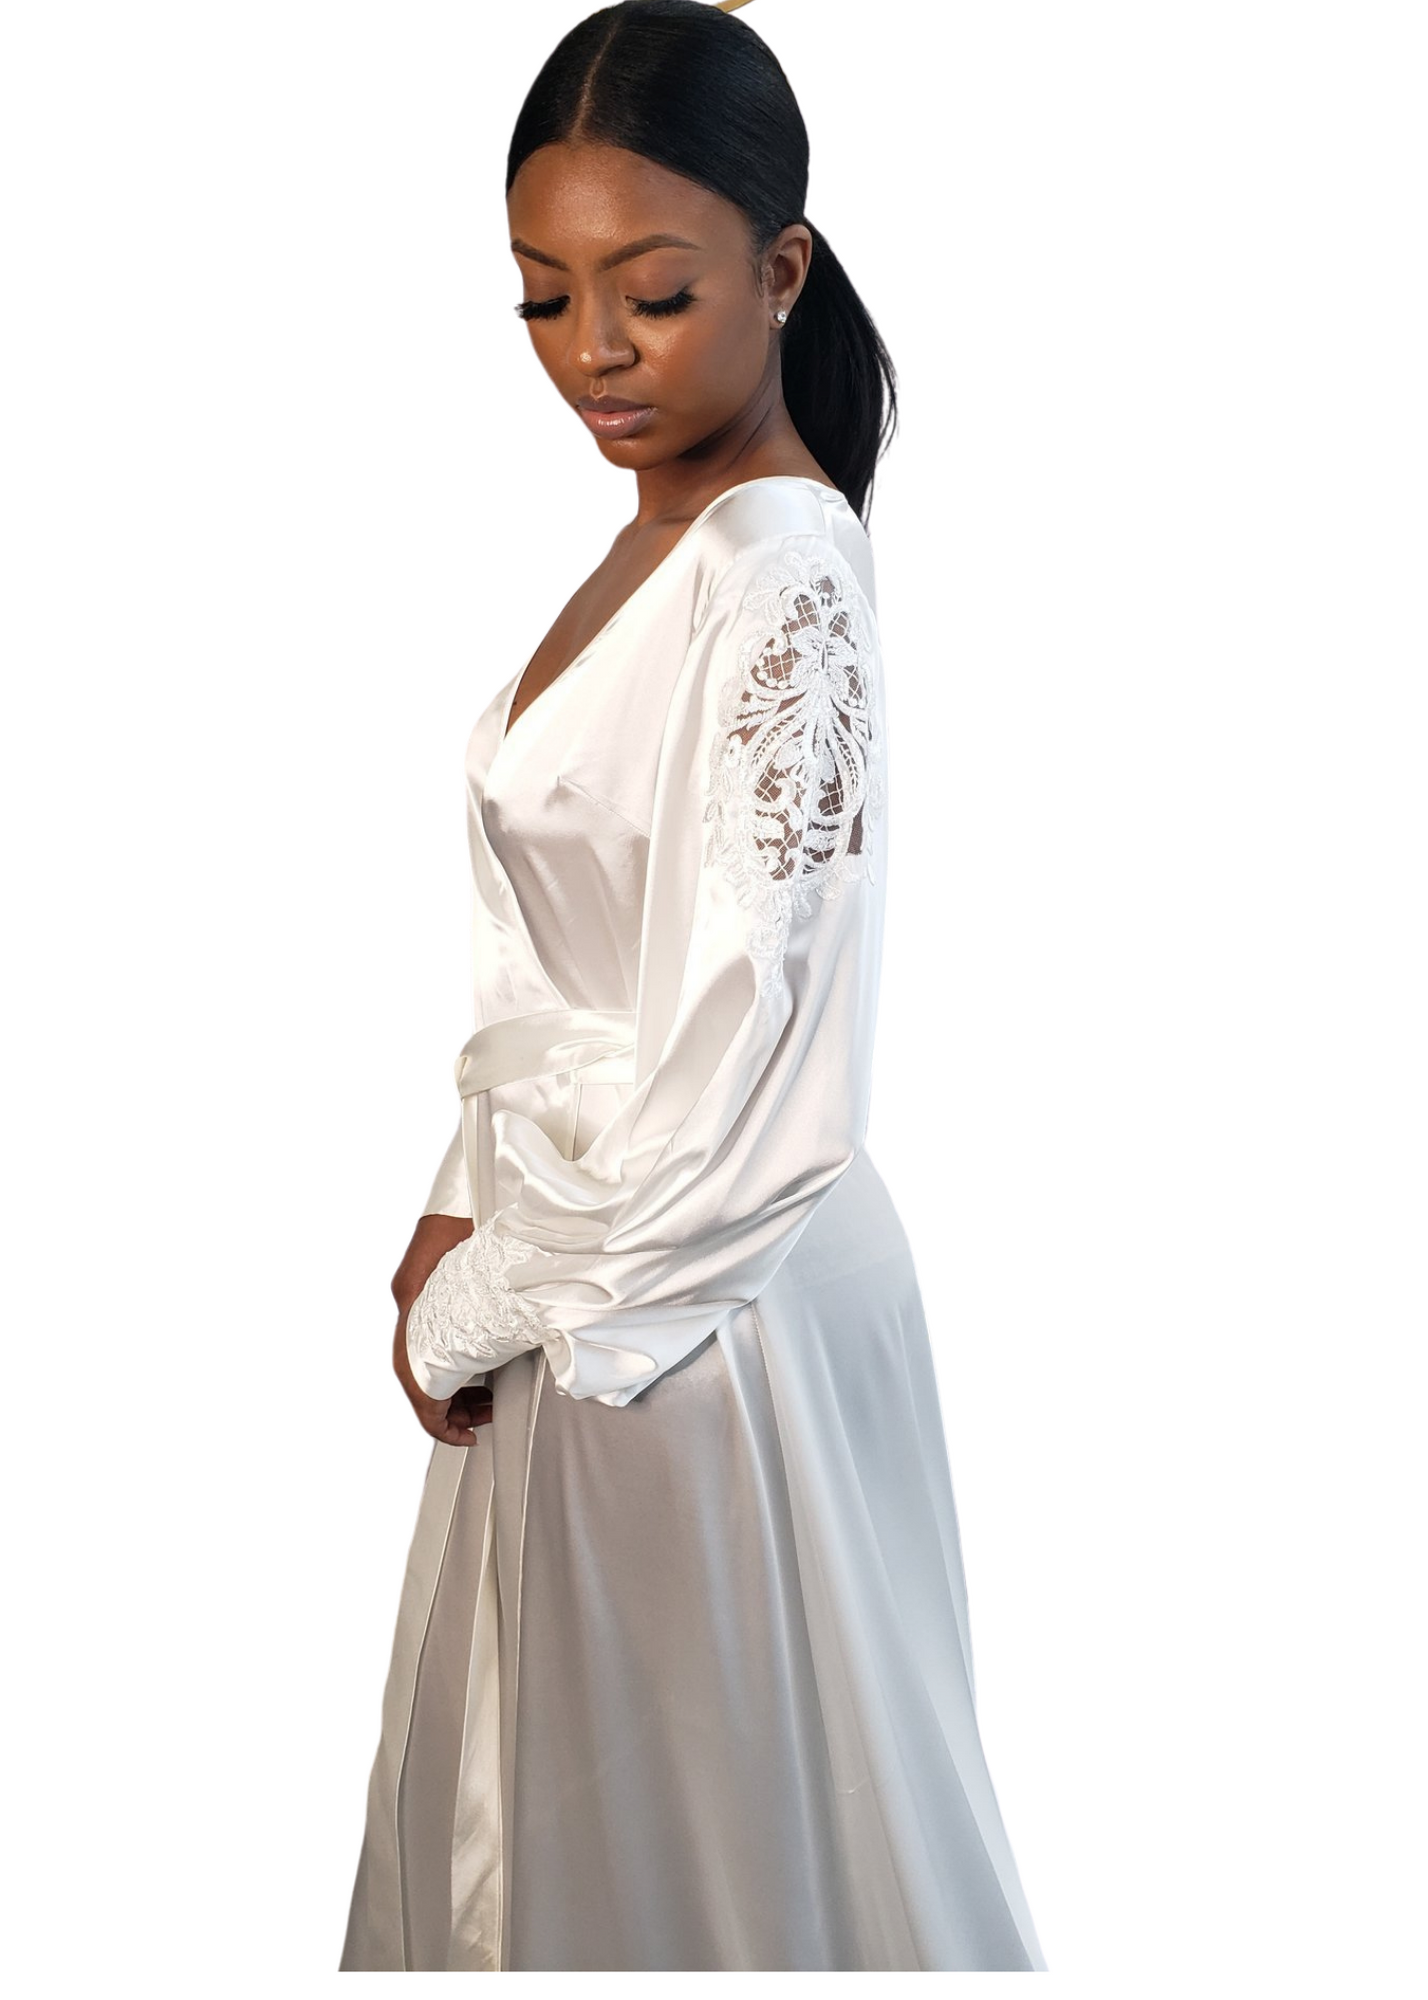 Side view of black female wearing long white satin robe with long sleeves, lace detailing, and tie waist